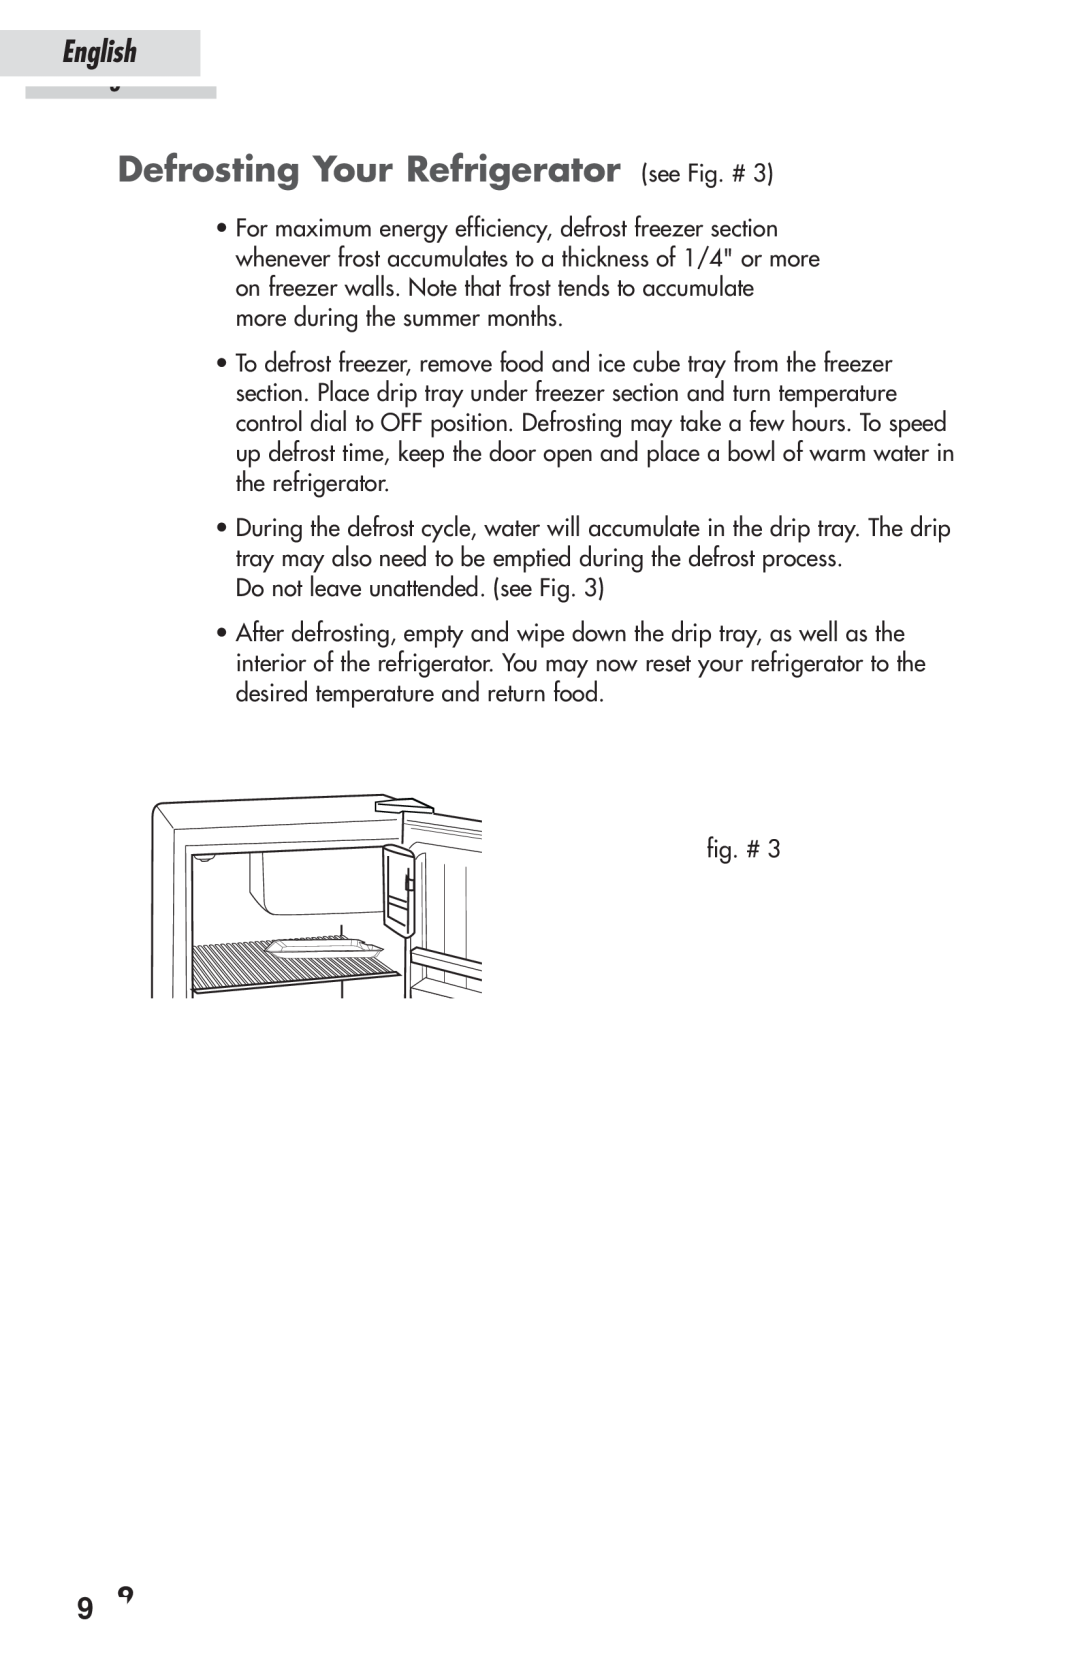 Haier HSP03WNAWW user manual Defrosting Your Refrigerator see Fig. #, English 